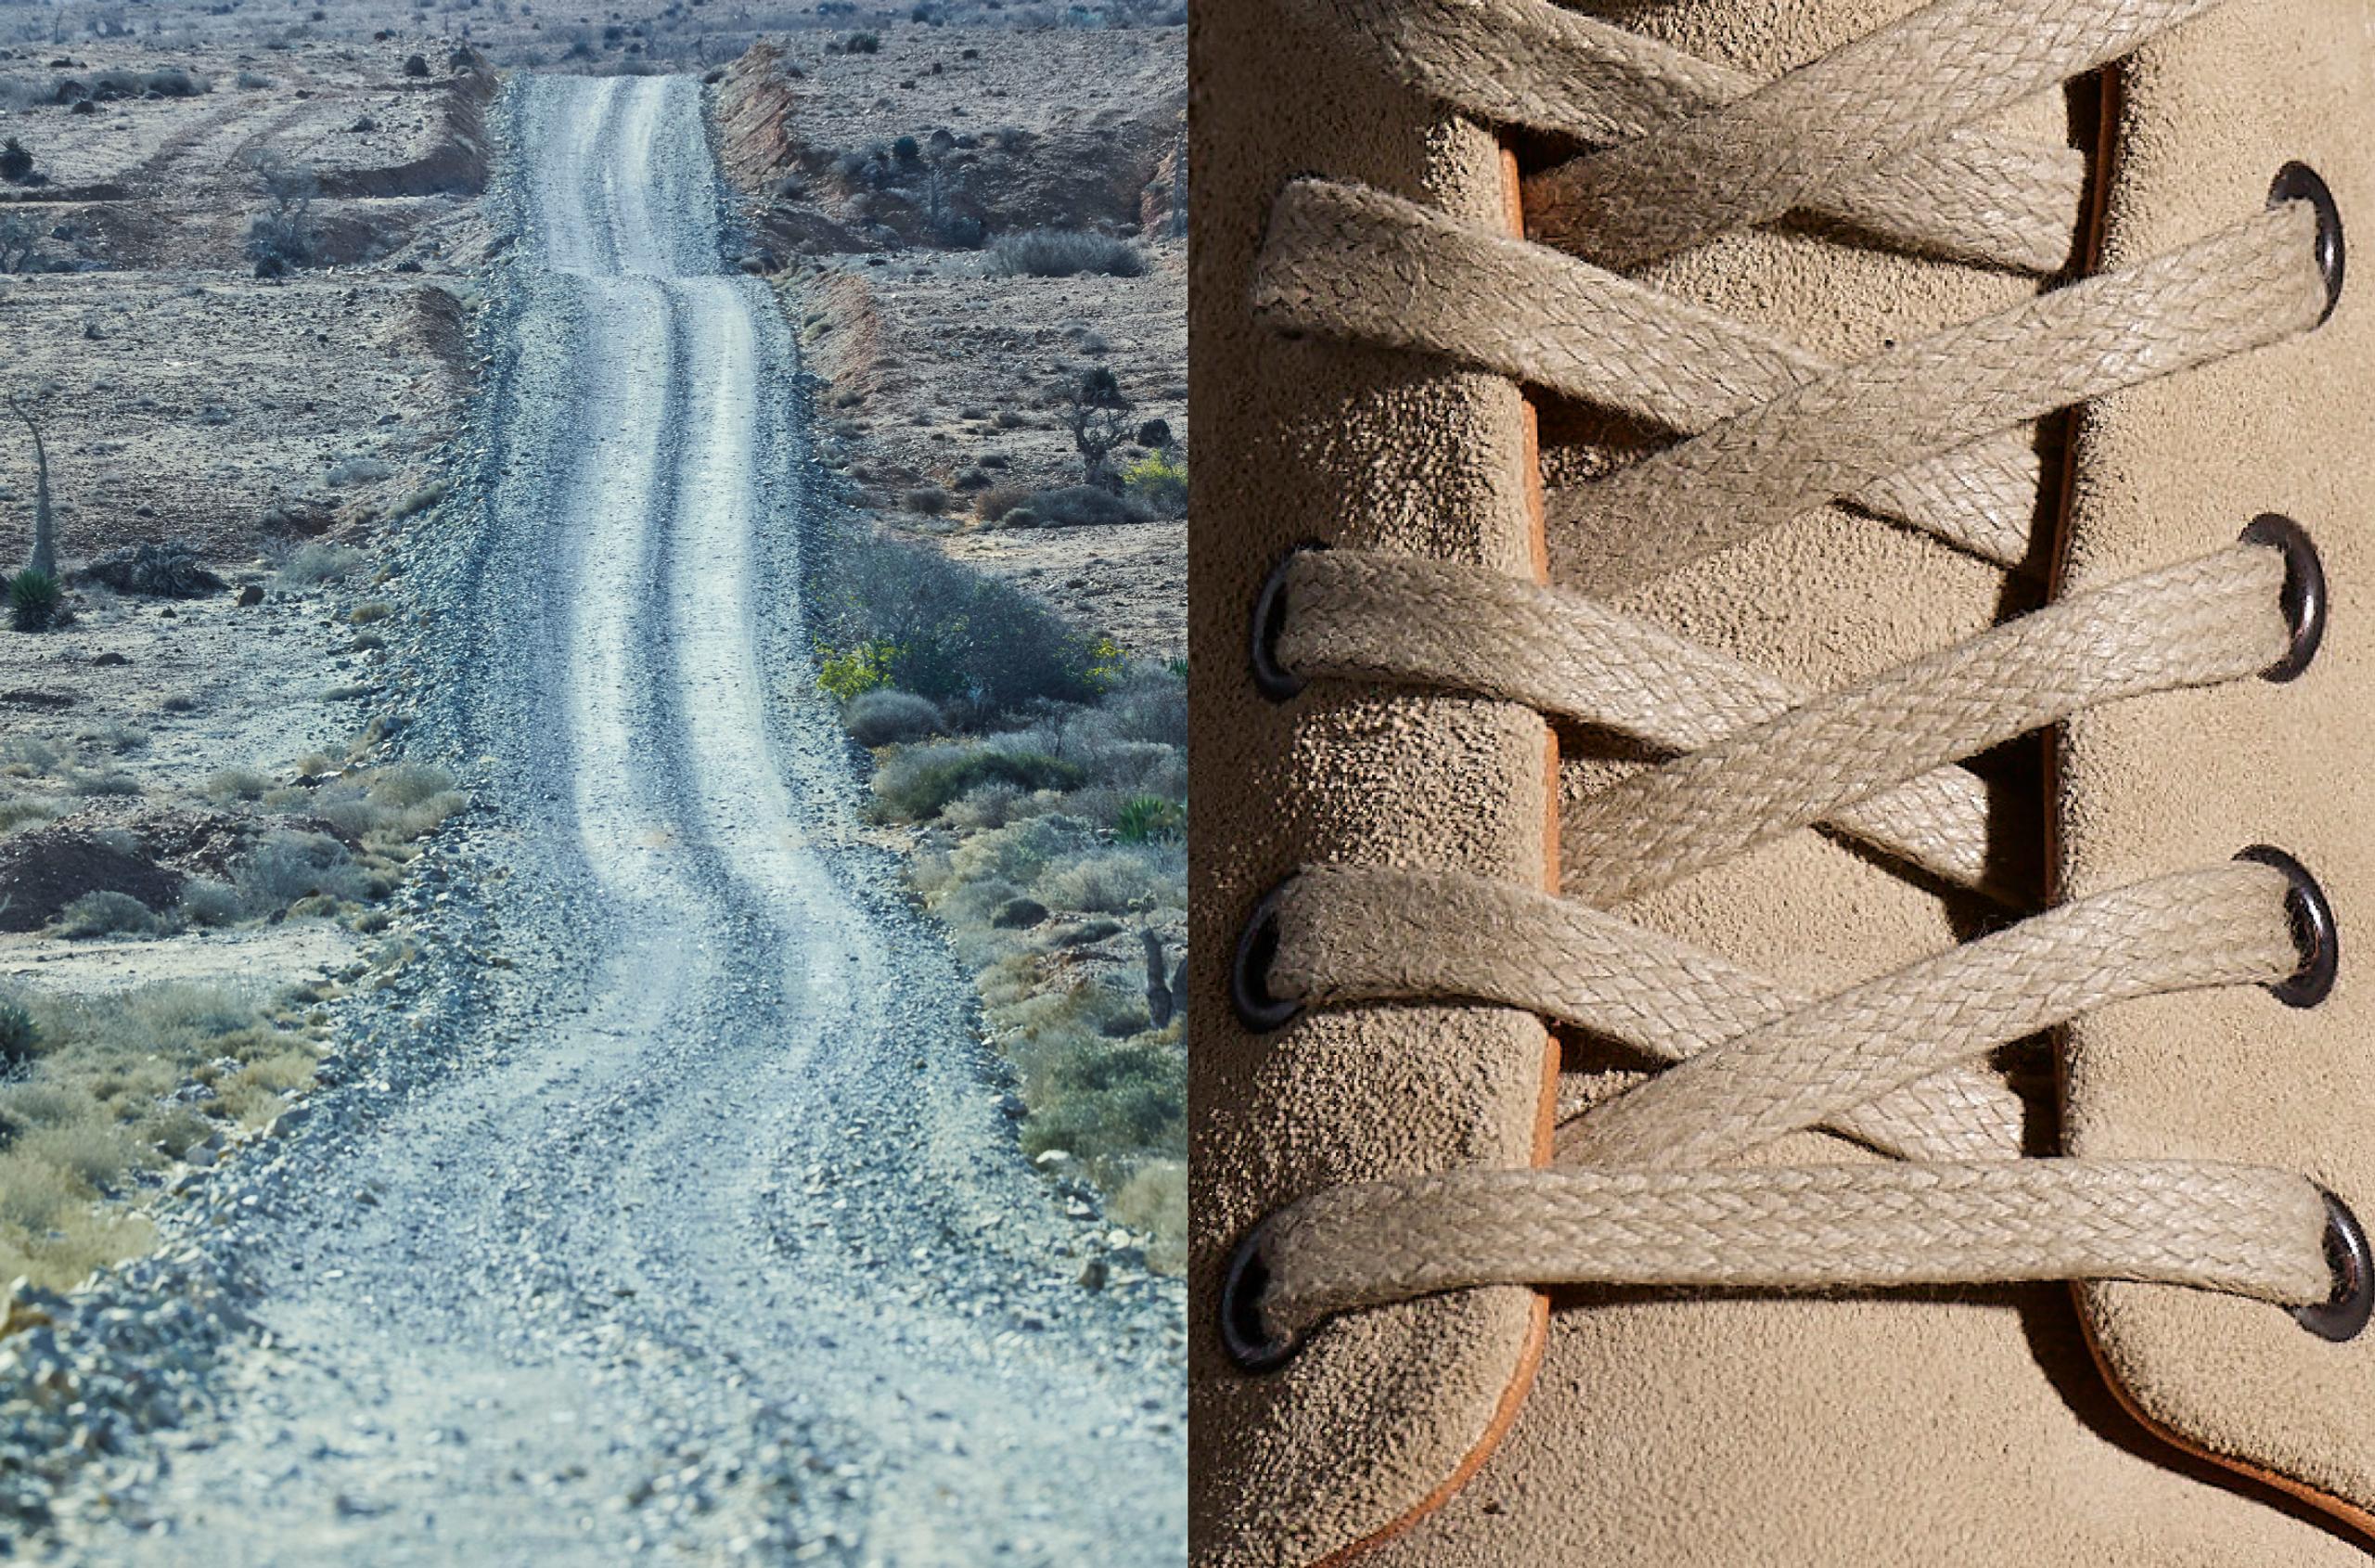 Juxtaposed photo of country road in Mexico next to detail photo of criss-crossed laces